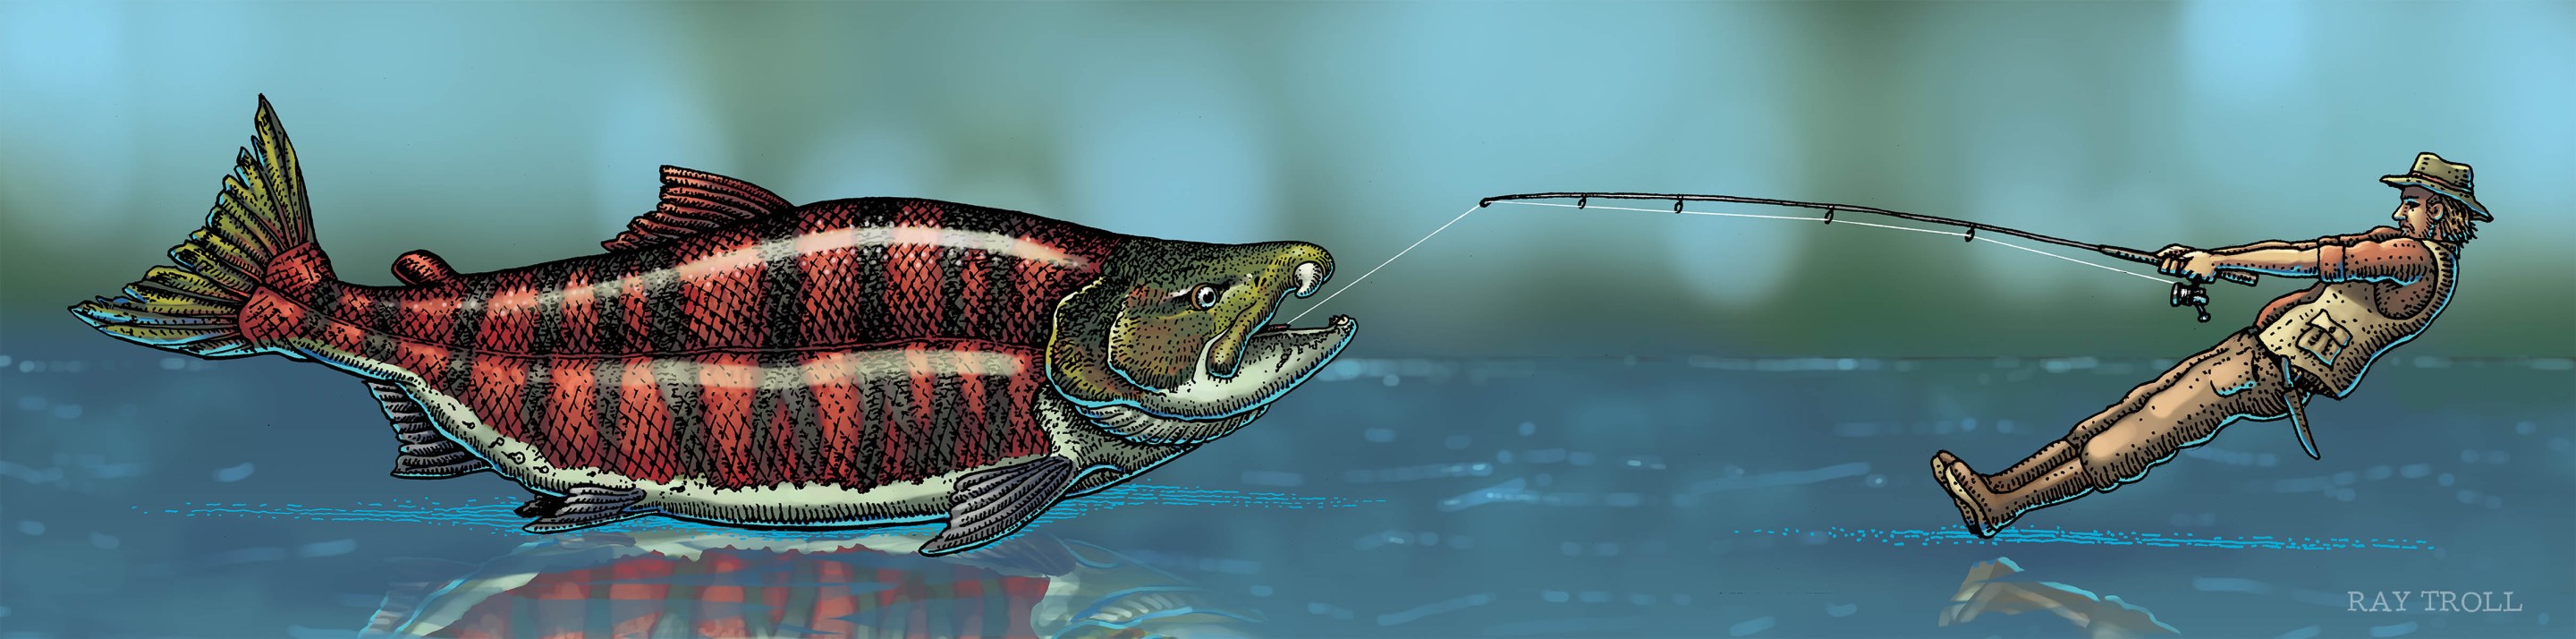 an illustration by Ray Troll depicting a gigantic spike-toothed salmon overpowering a fisherman